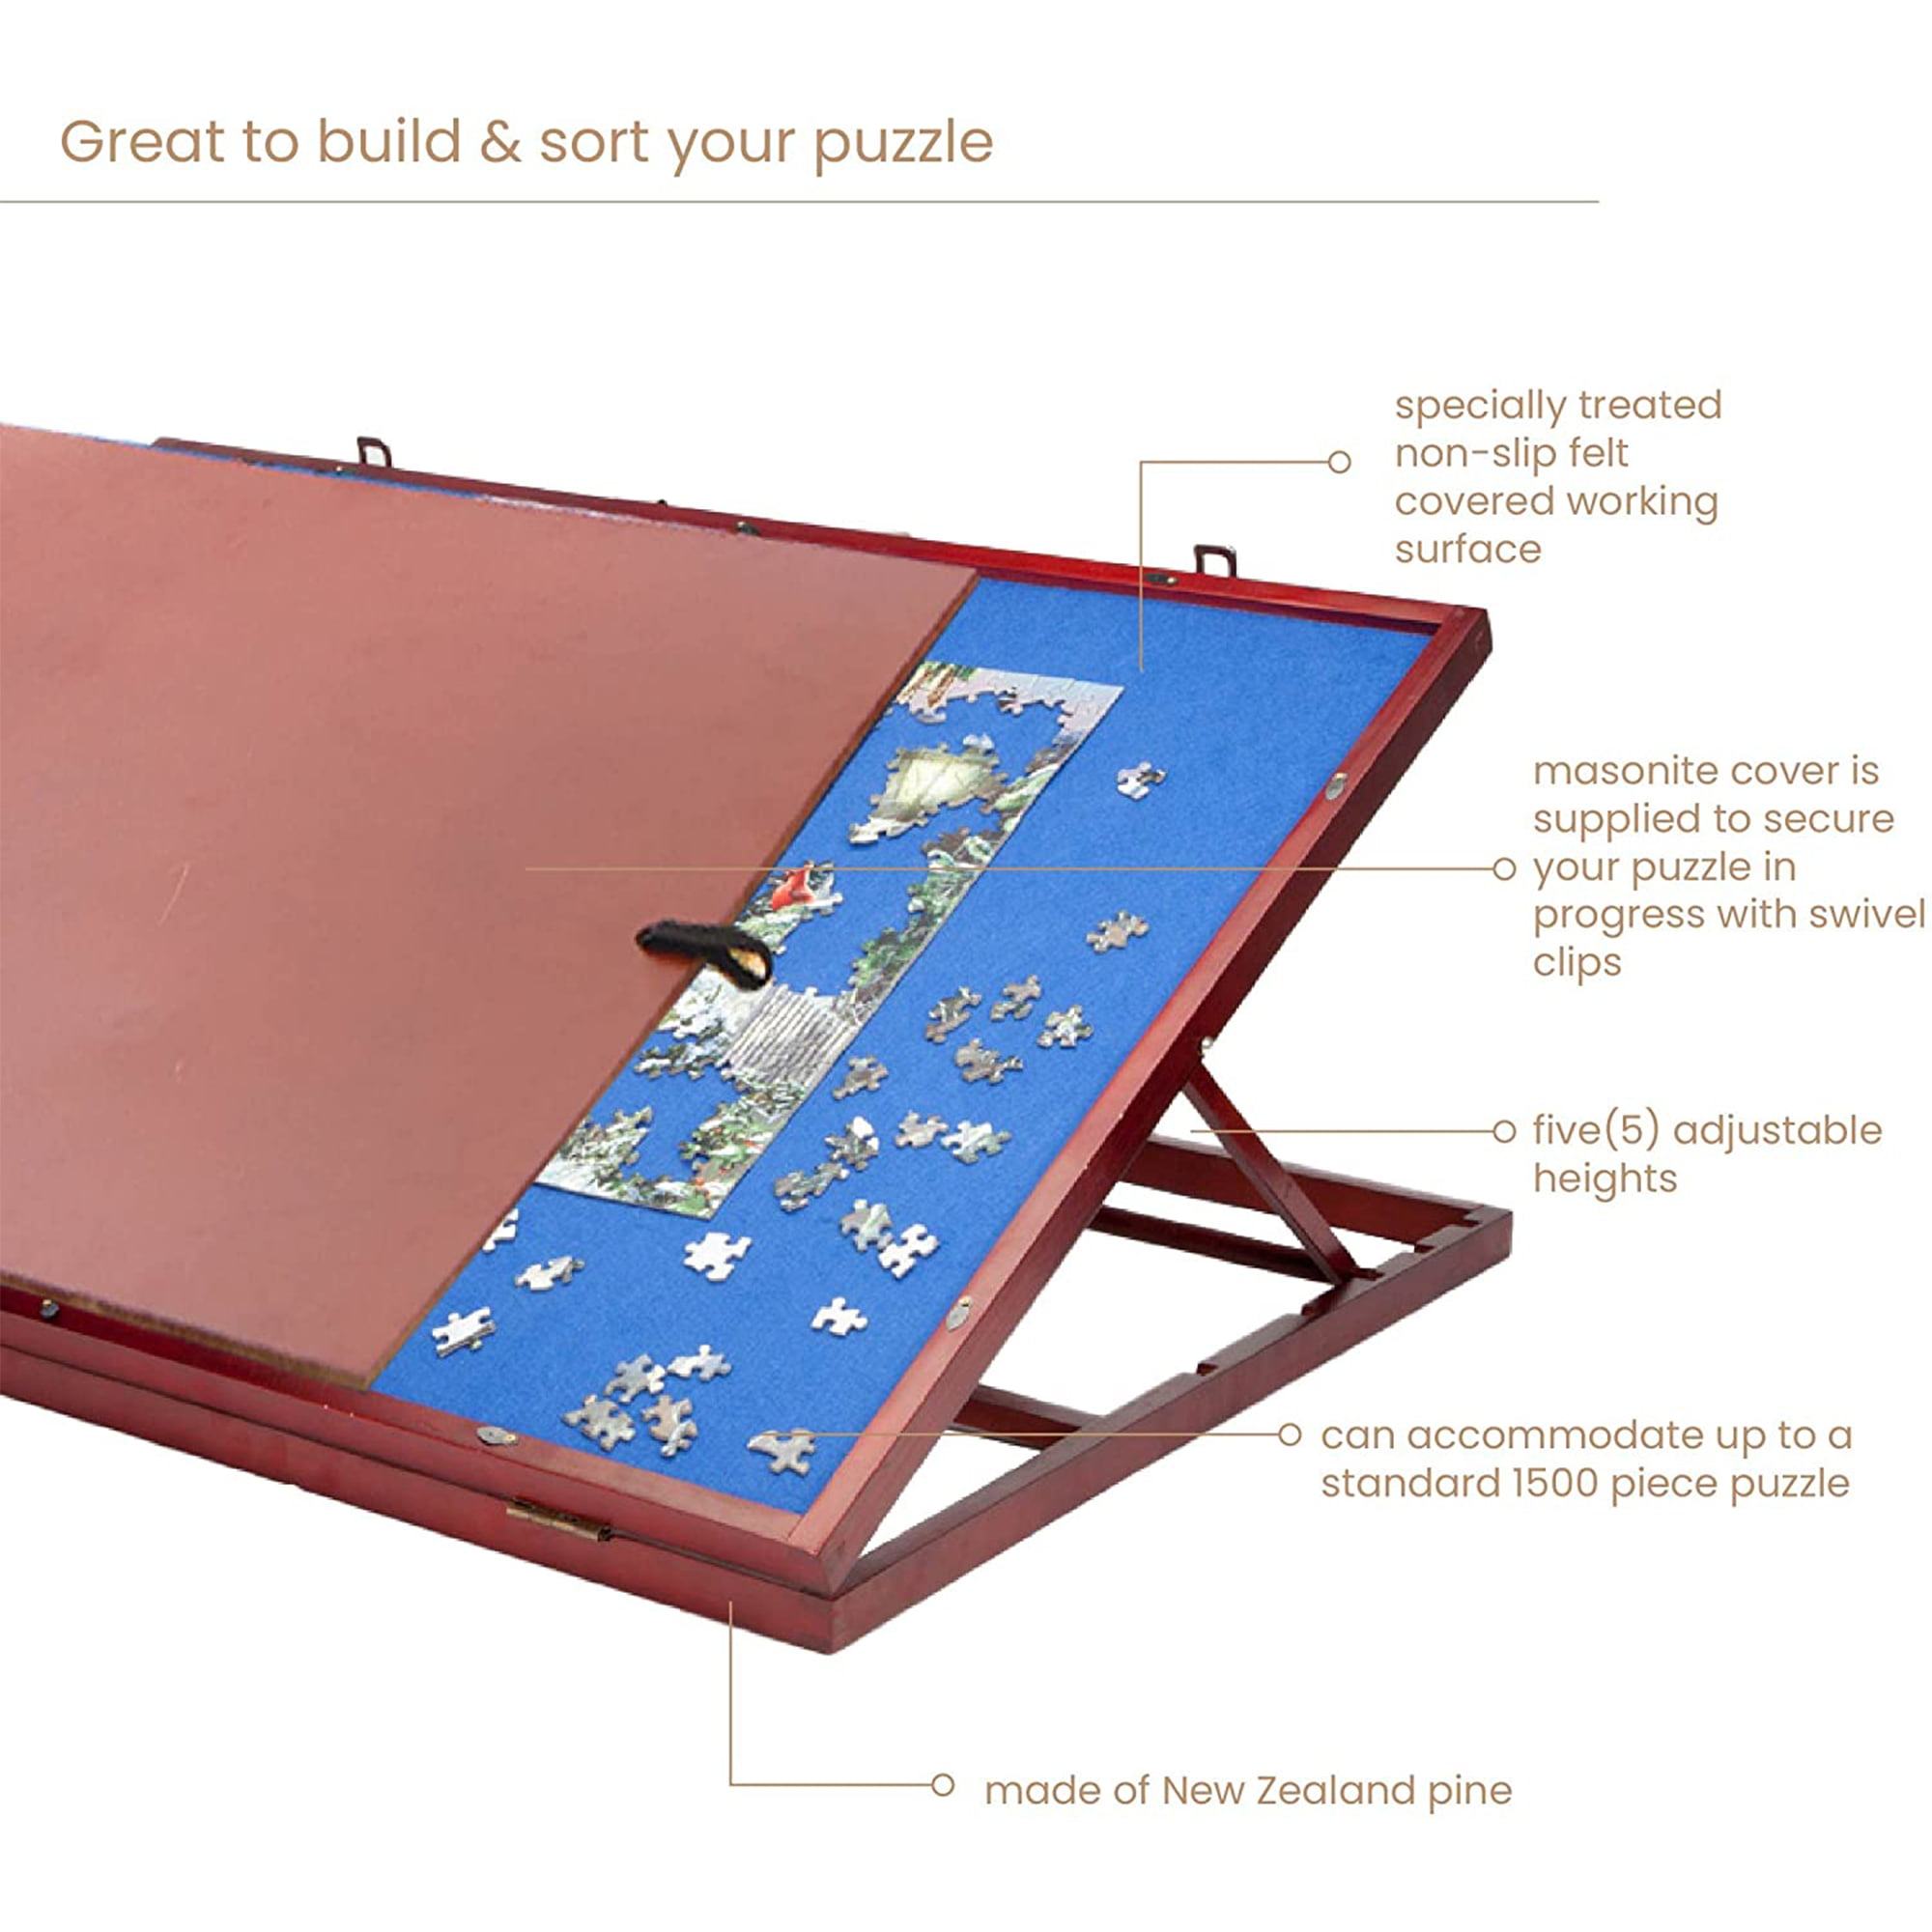 Brand NEW Puzzle Easel - Assemble Your Puzzles Raised Up Off The Table -  general for sale - by owner - craigslist